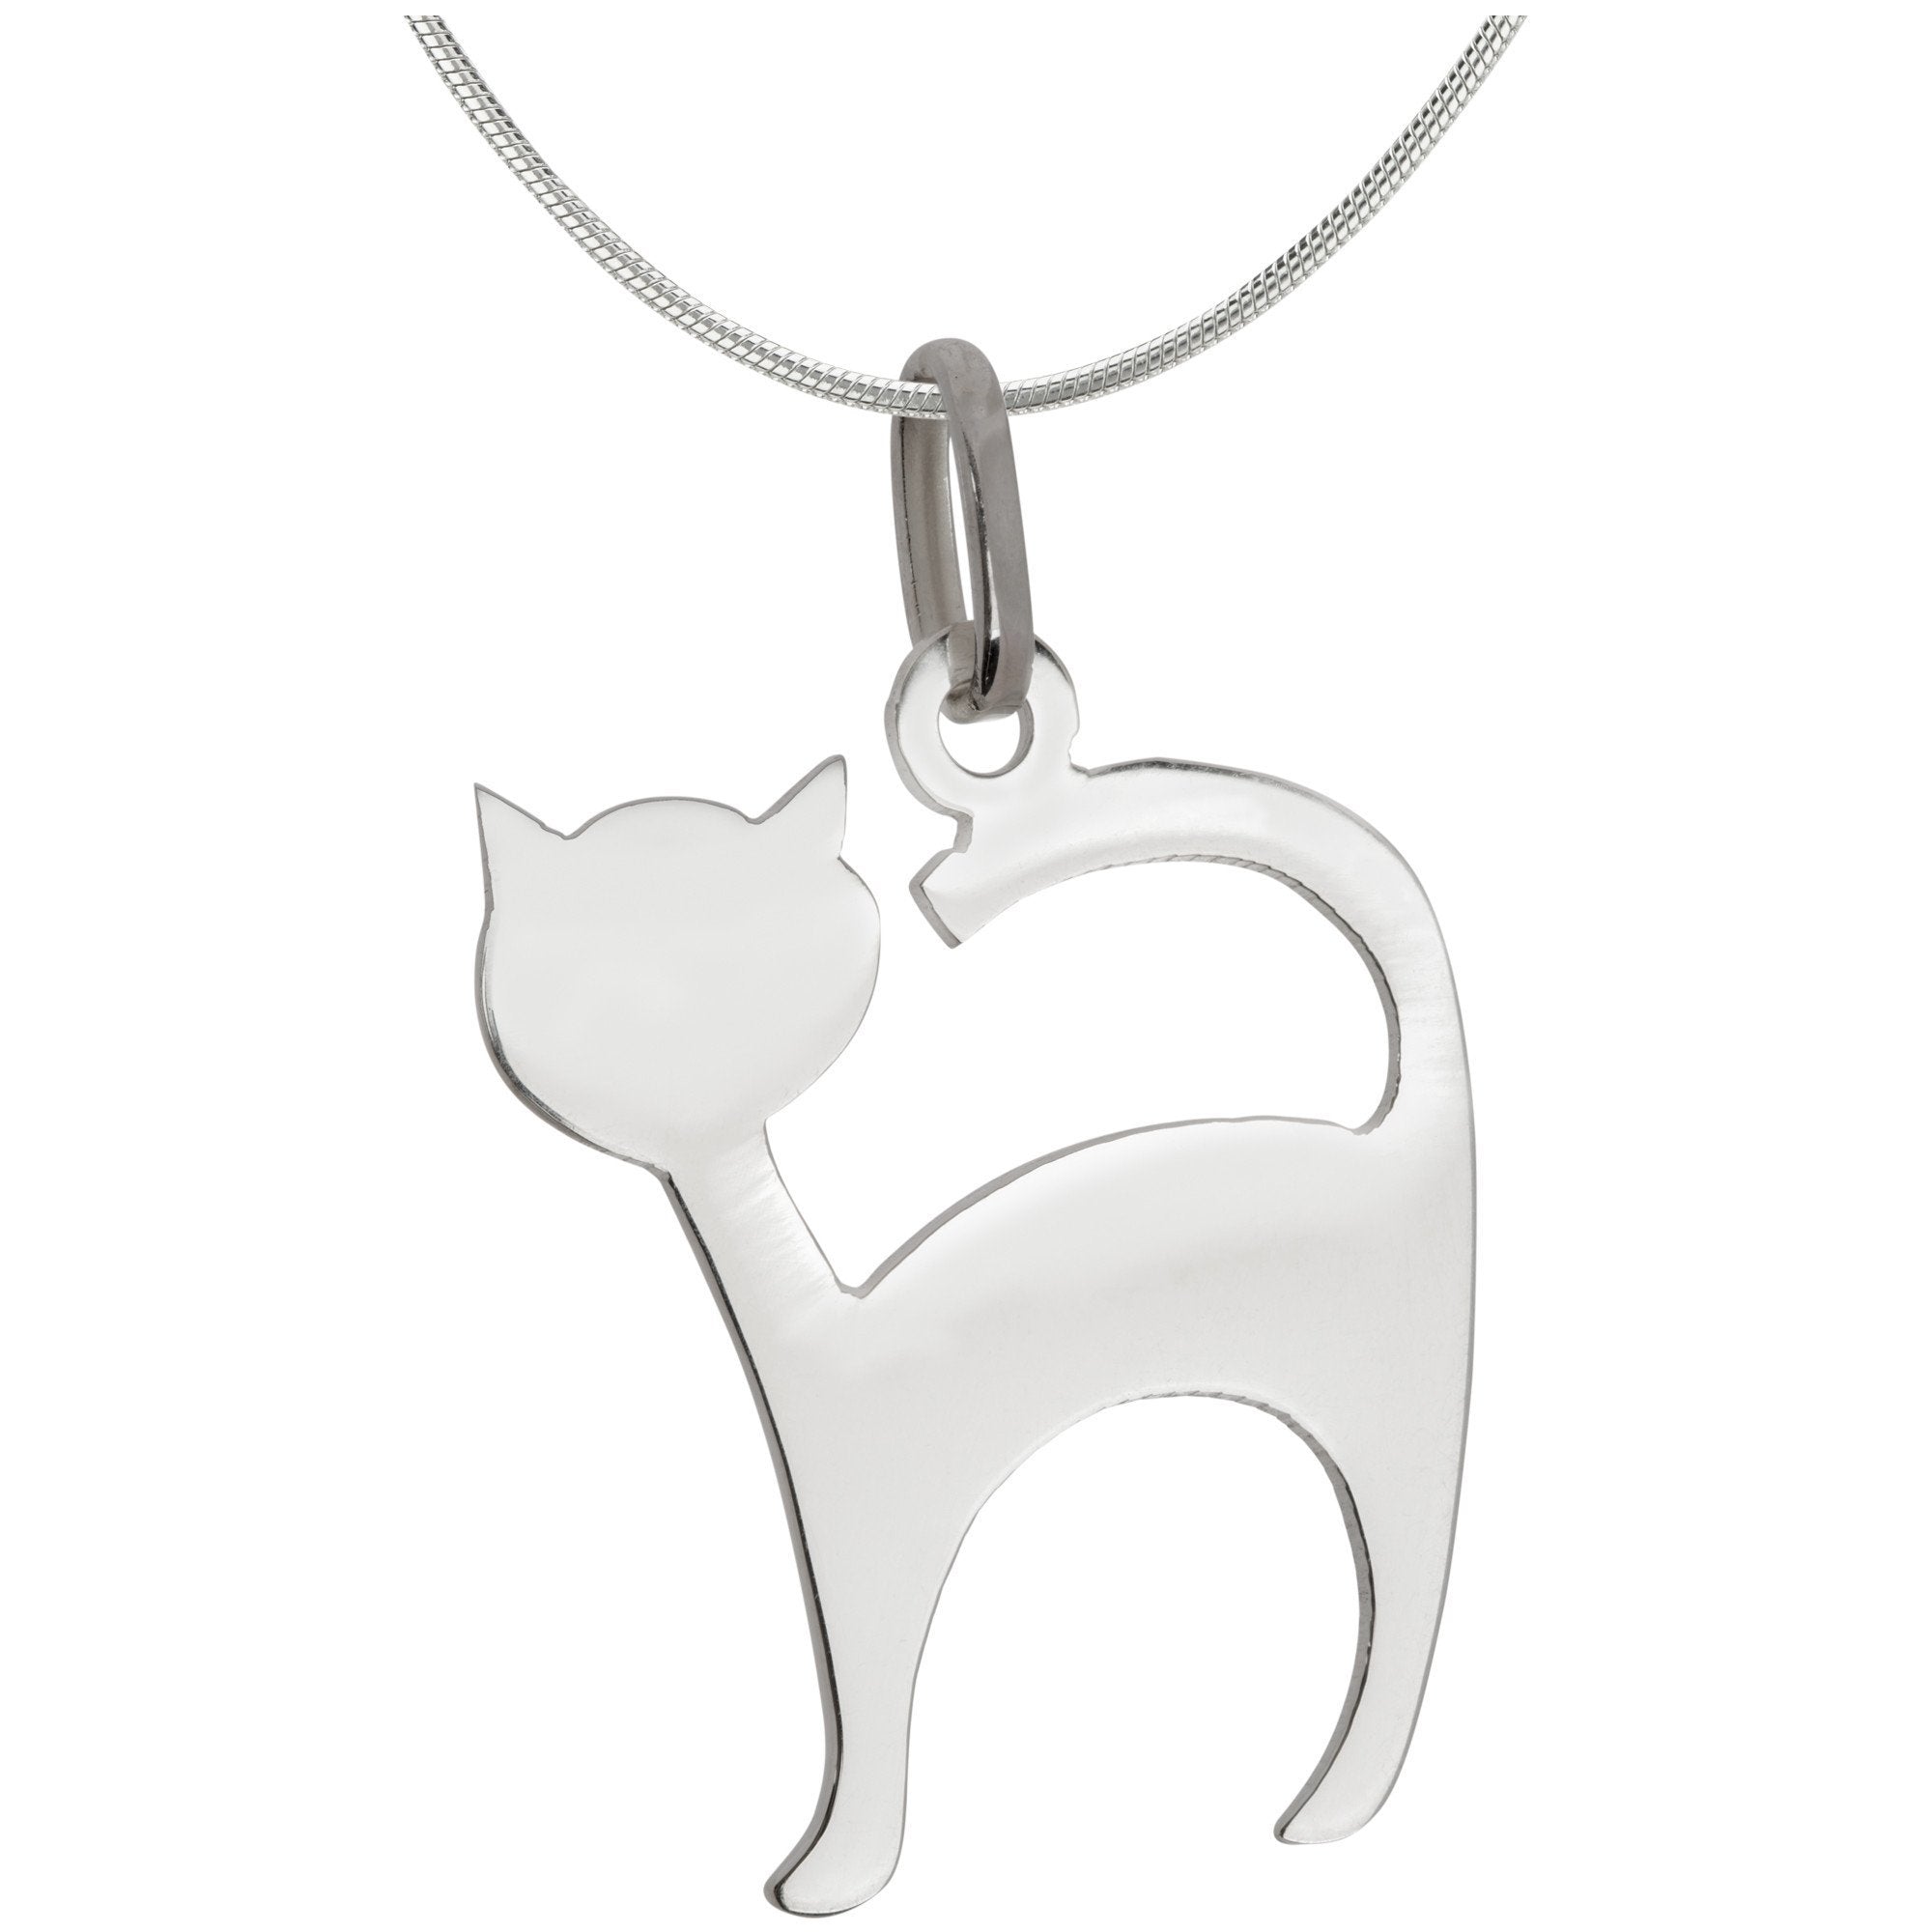 Cat Sterling Silhouette Necklace - With Diamond Cut Chain